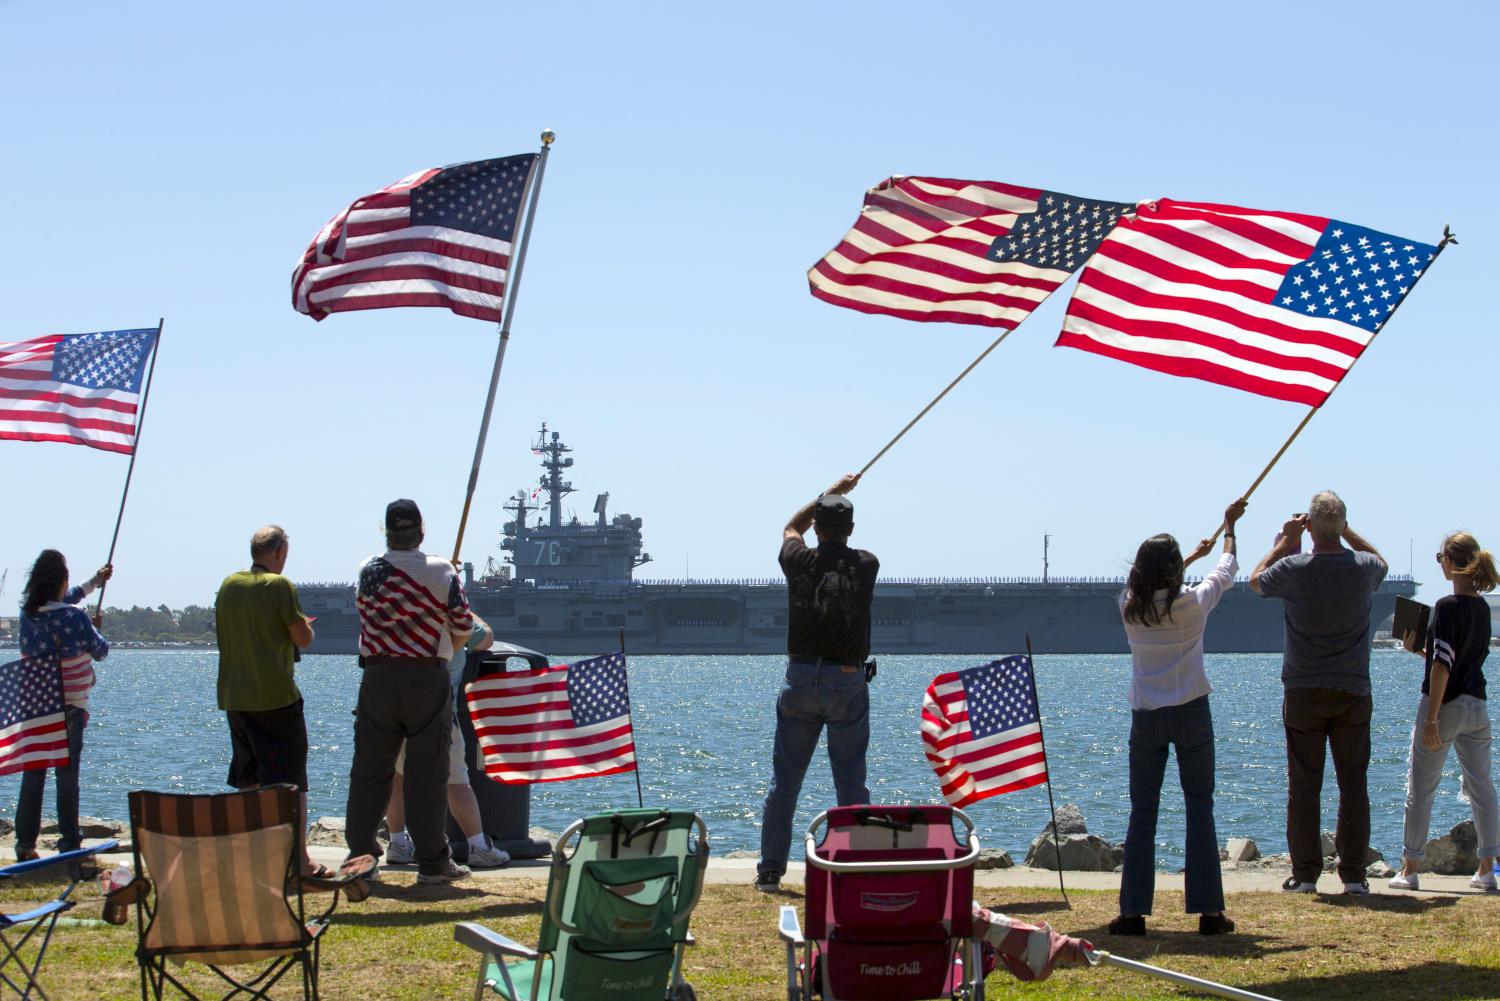 Supporters wave American flags along the shoreline as the USS Ronald Reagan, a Nimitz-class nuclear-powered super carrier, departs for Yokosuka, Japan from Naval Station North Island in San Diego, California  August 31, 2015. The Reagan is replacing the USS George Washington as part of a complicated three-carrier swap that exchanges crews for ships, saving the Navy millions in moving costs.  REUTERS/Mike Blake - GF10000188448